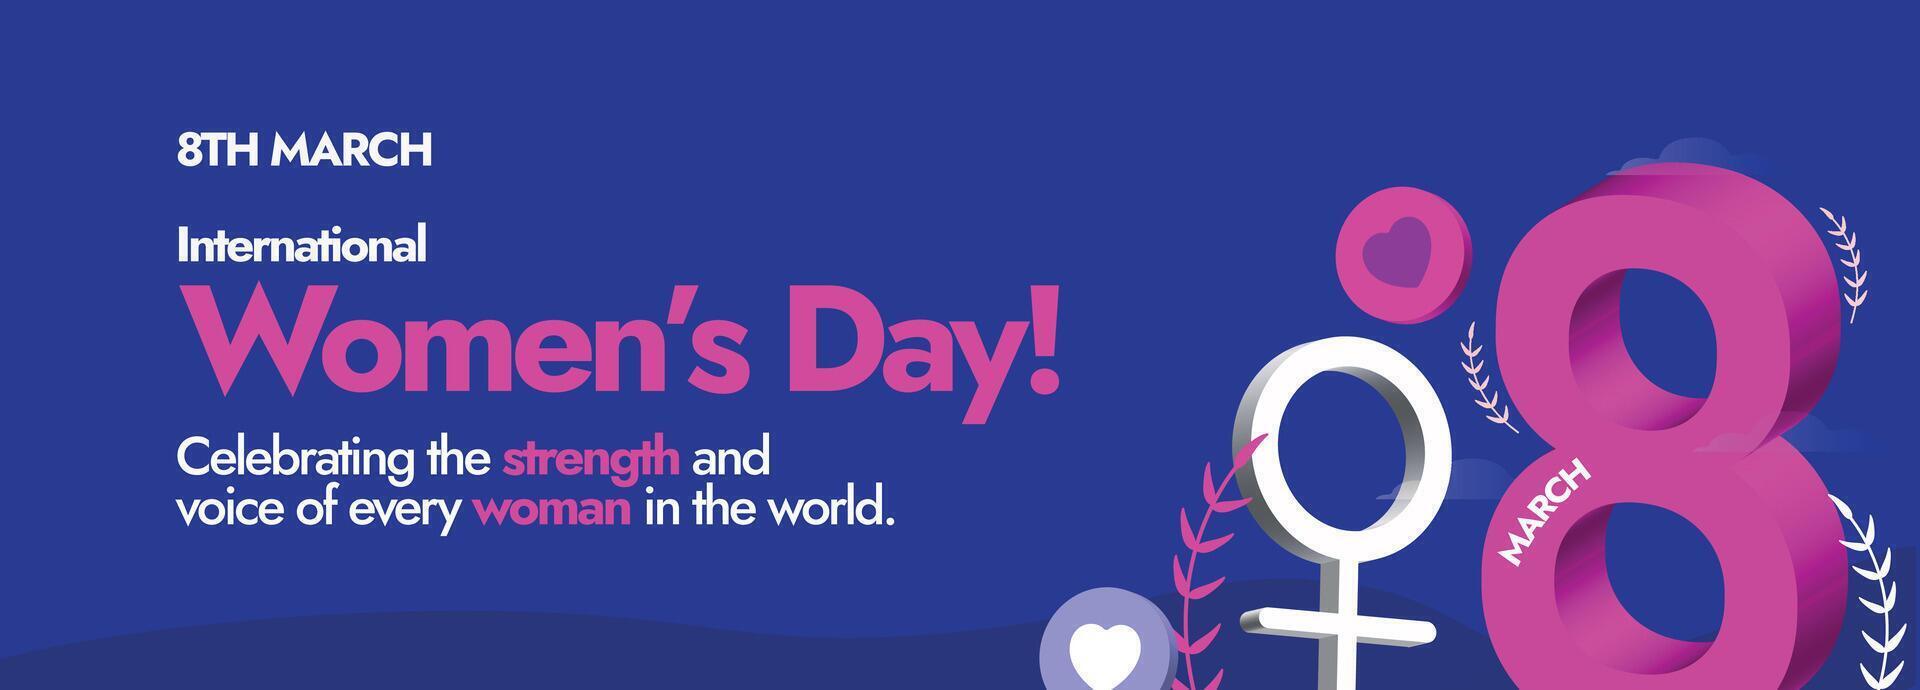 International Women's Day, 8th March Women's day celebration cover banner in dark purple colour with number 8 icon in pink colour and girl symbol in white colour. Invest in women, Accelerate progress. vector